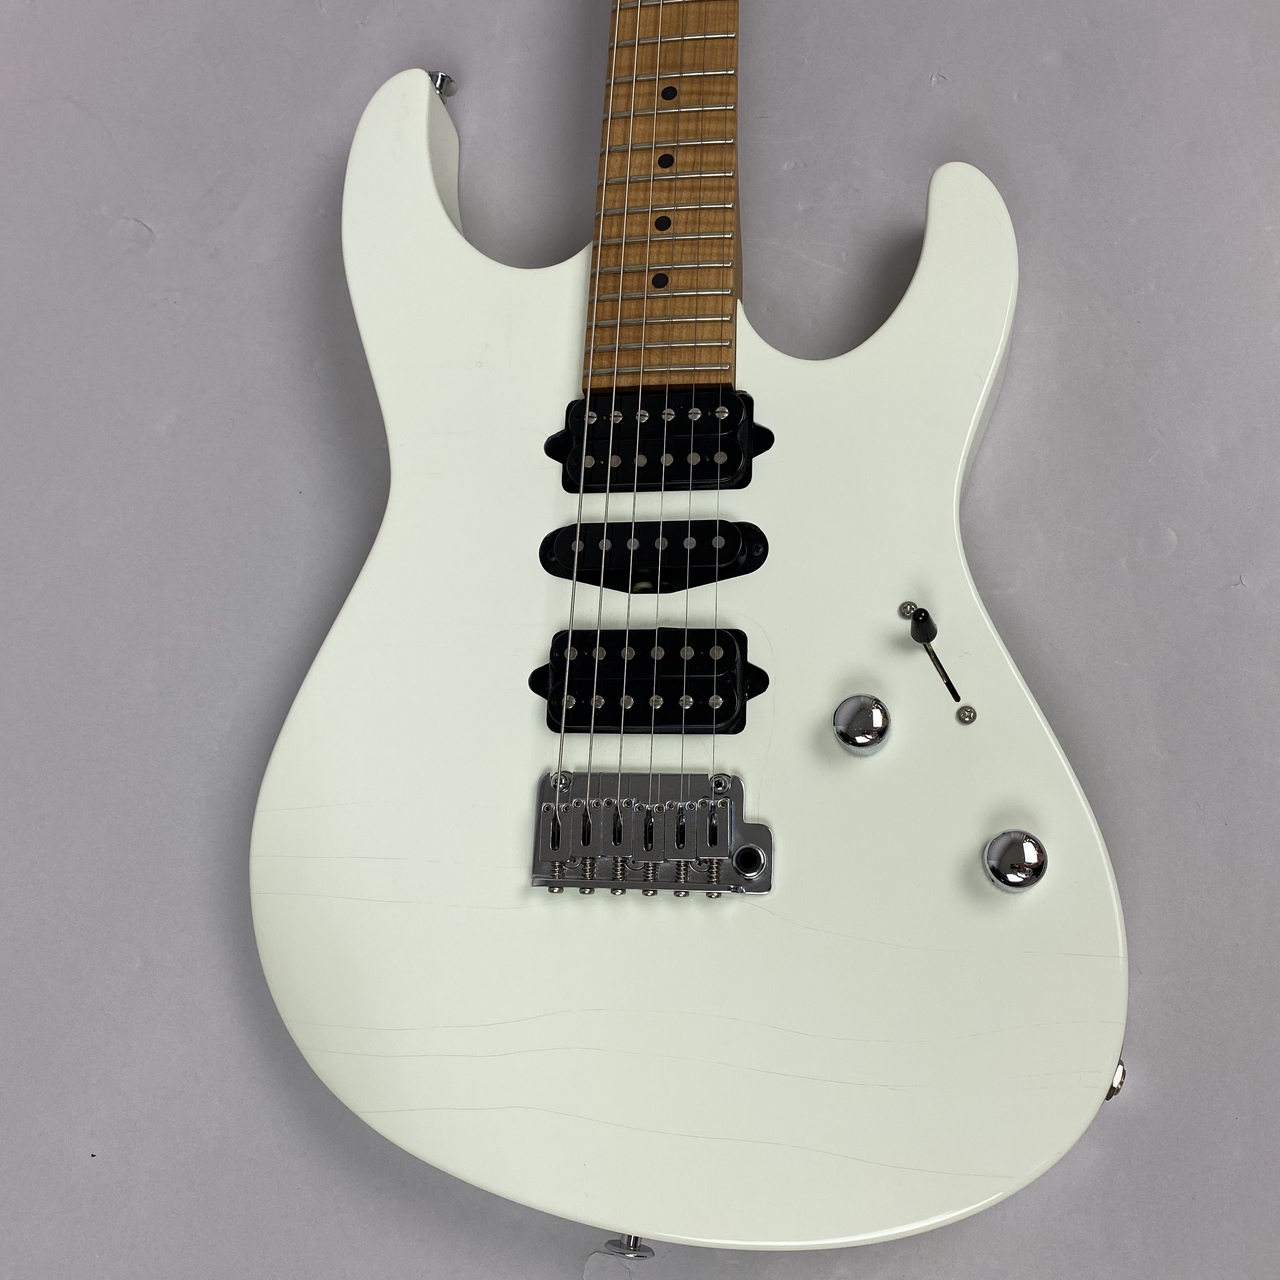 Suhr(正規輸入品) Custom Modern Antique Rosted Alder Body Chambered Nickel frets - Olympic White